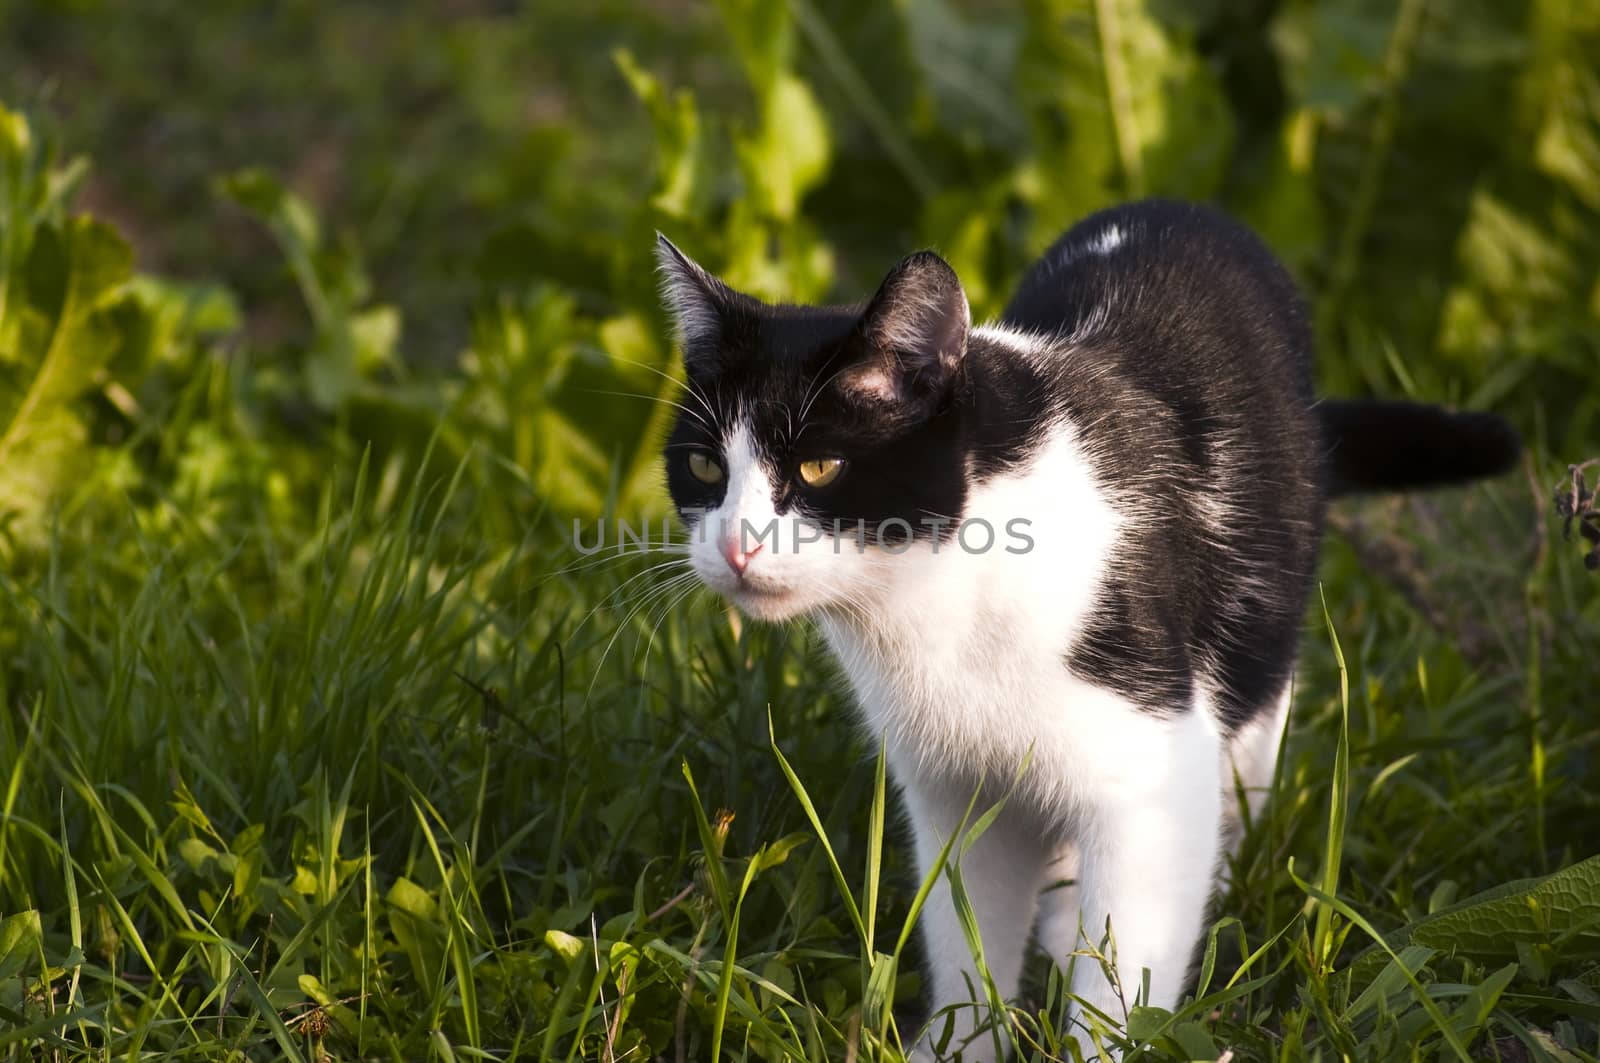 black and white cat by pozezan